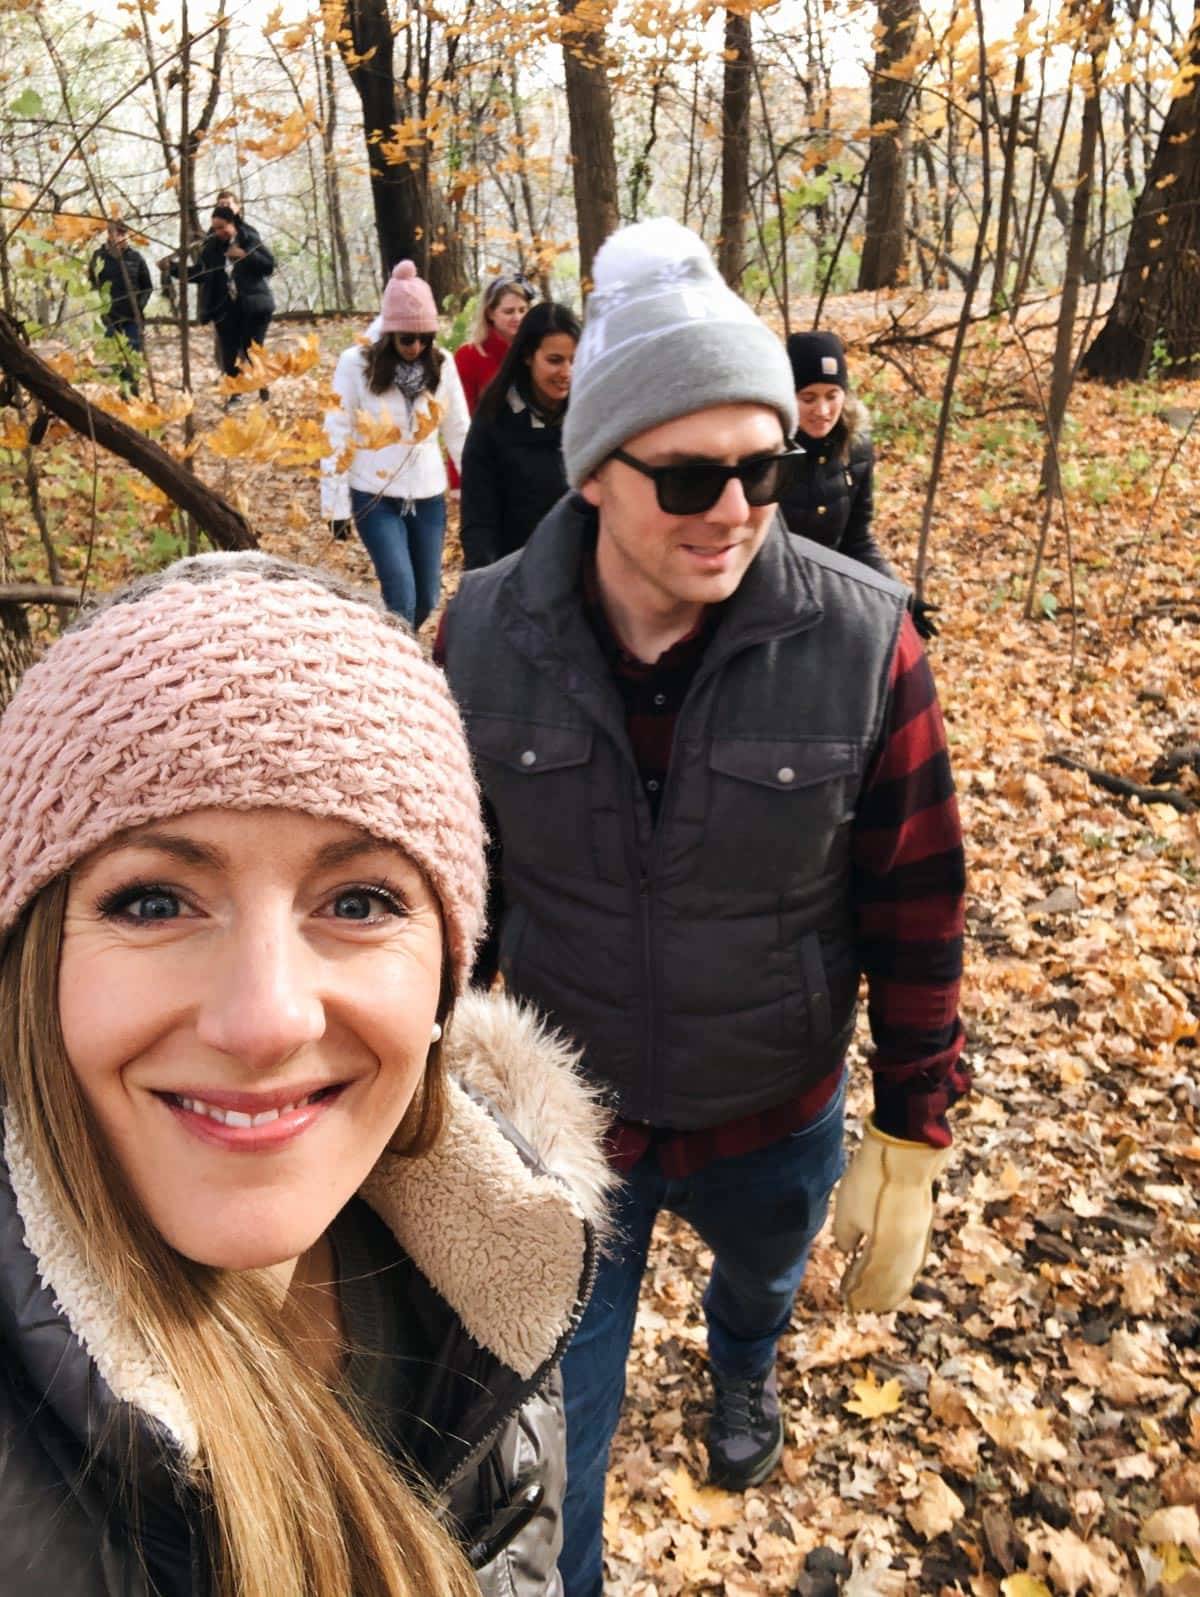 People wearing beanies hiking in the woods.